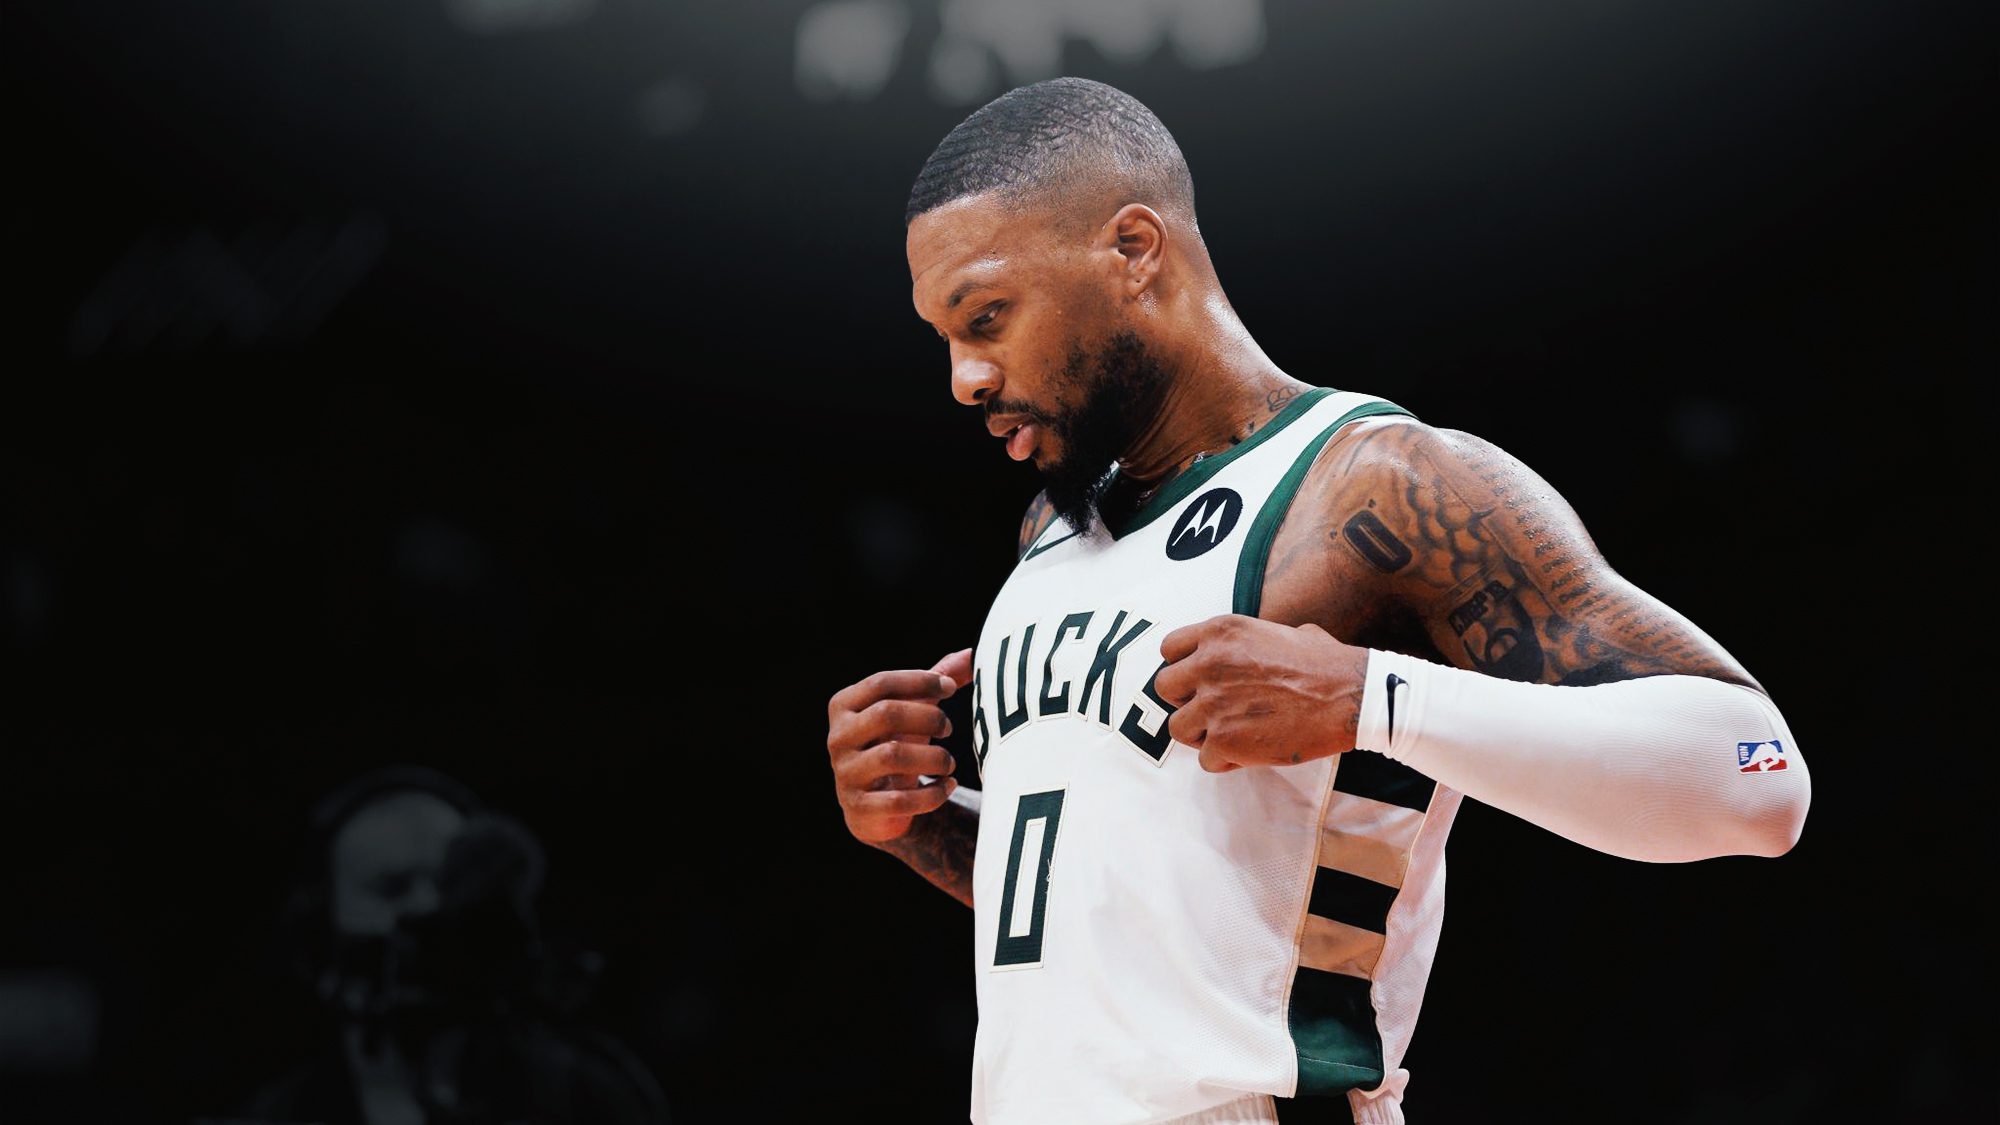 Damian Lillard On Unknown Factor That Led to Him Joining Bucks